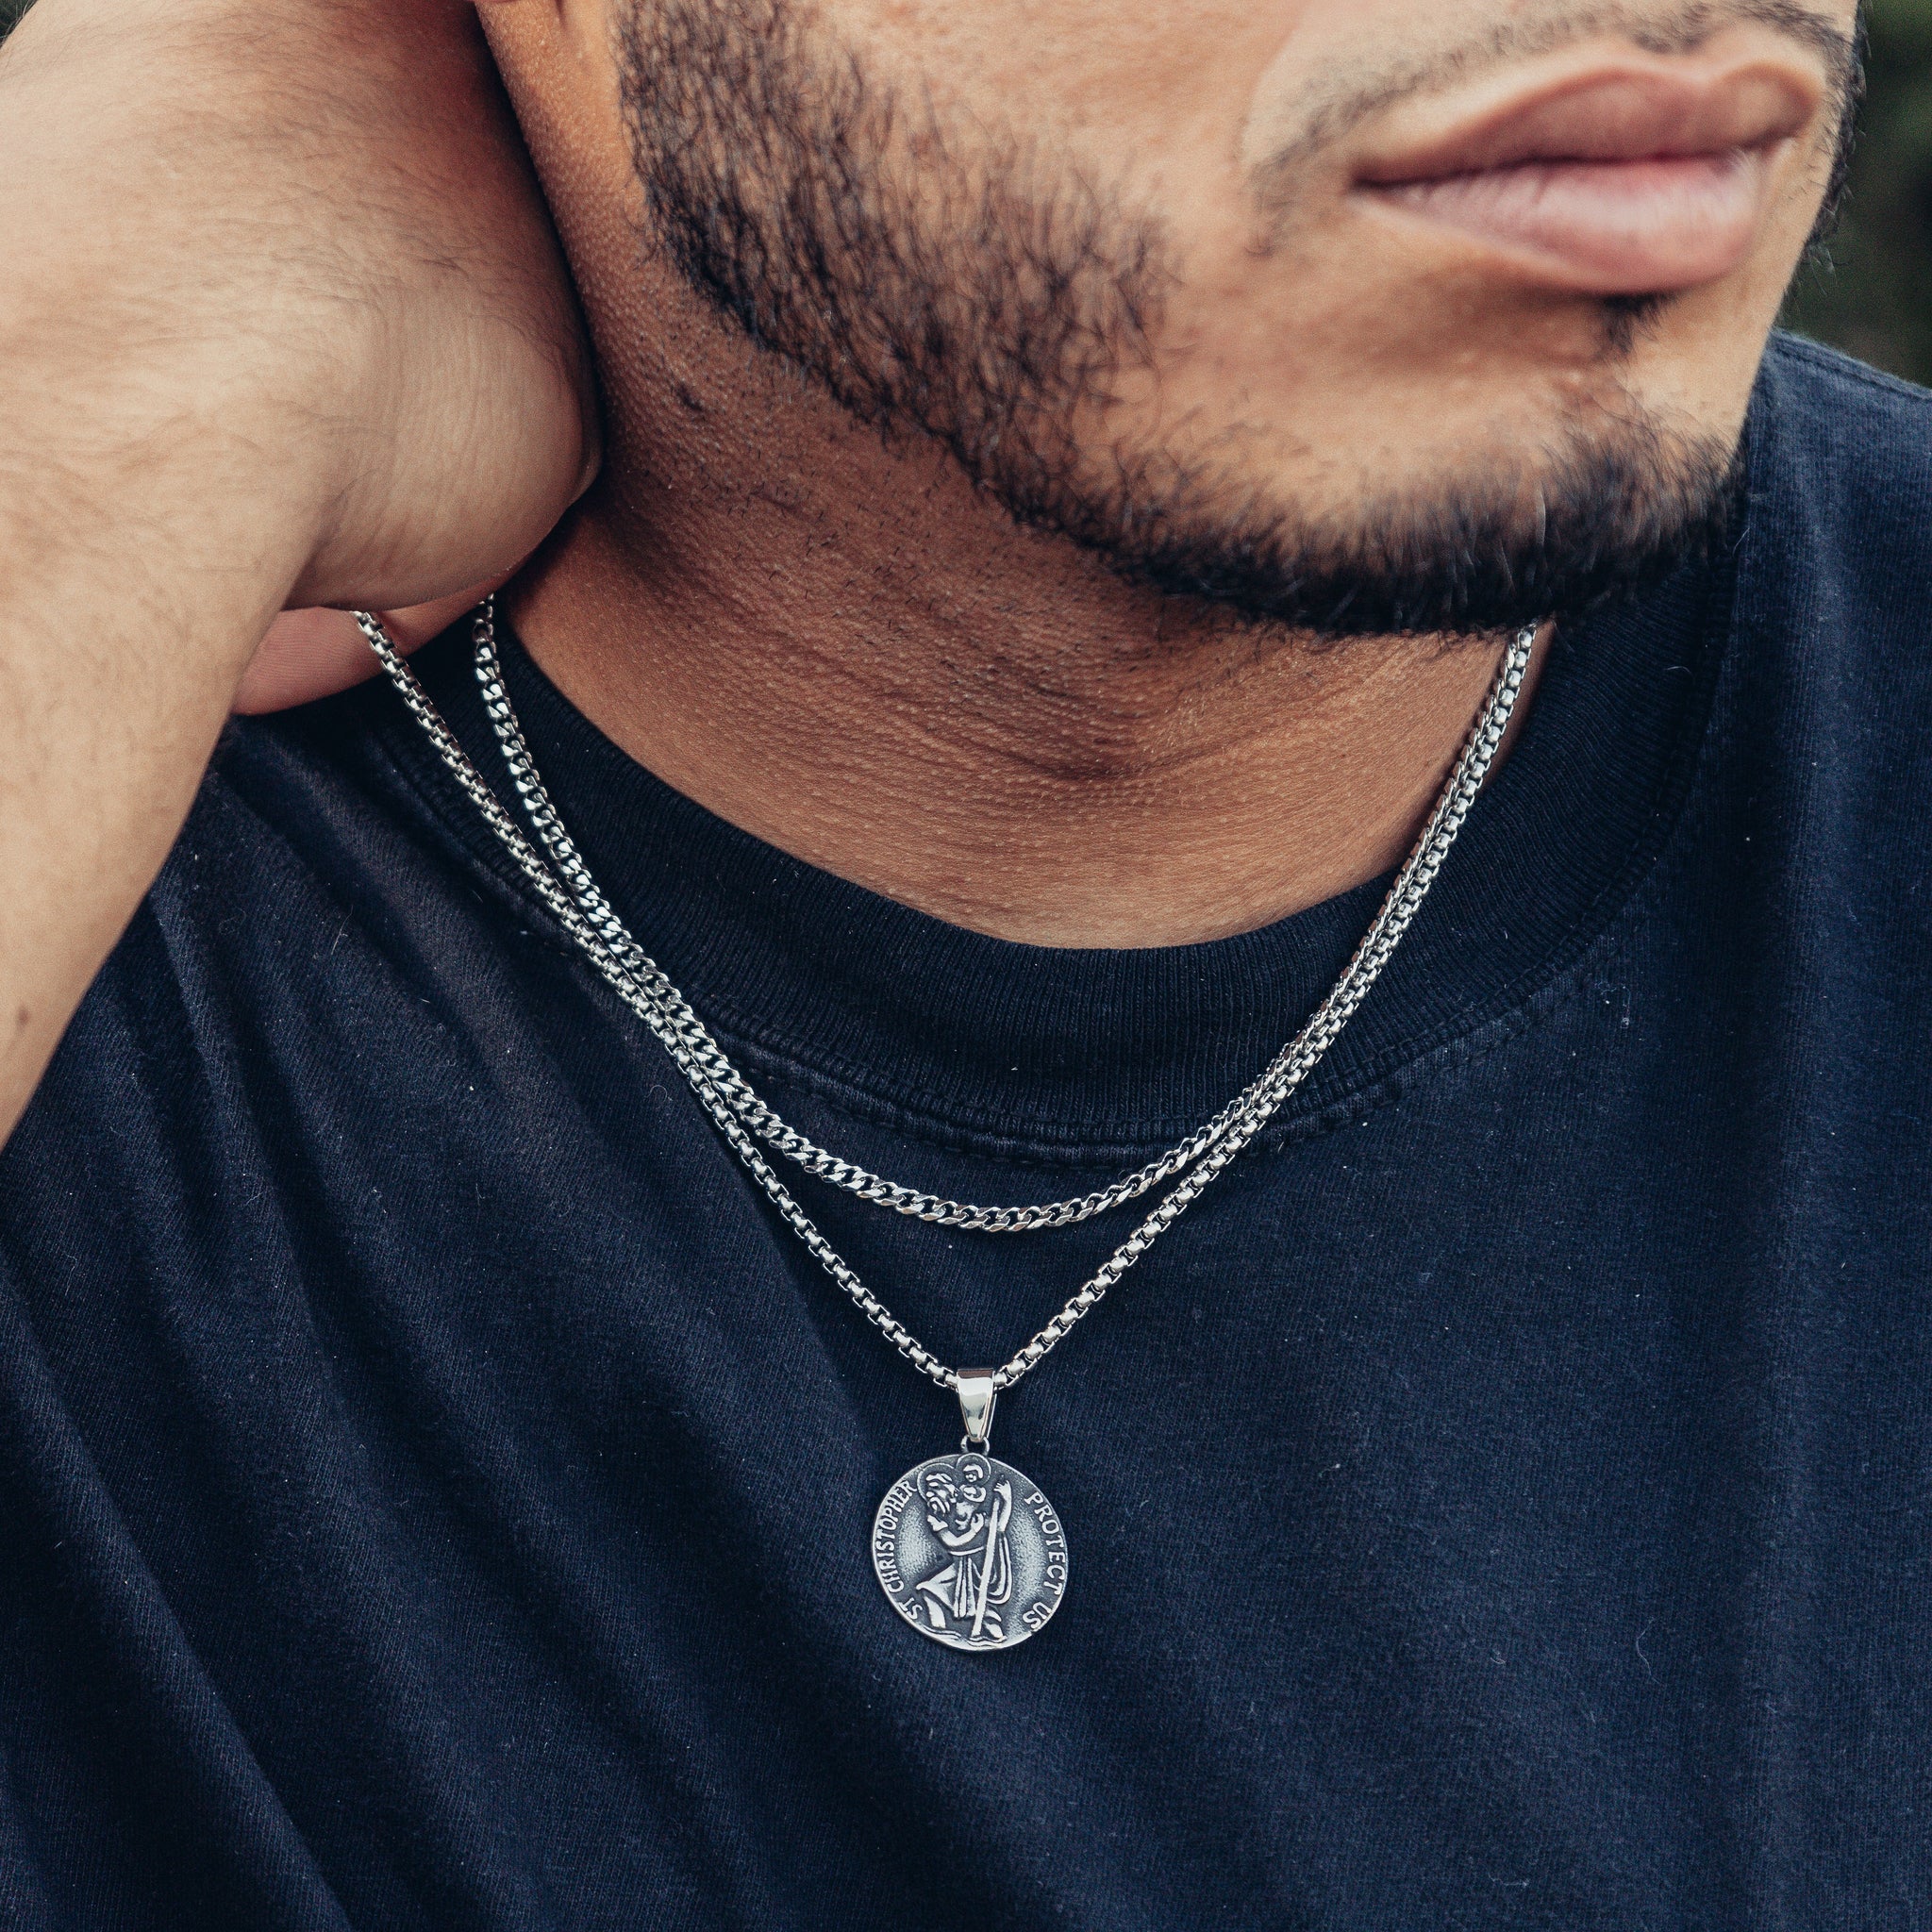 Rajputana St Saint Michael Christopher Necklace Pendant Medal for Men Women  with Stainless Steel Chain 24 Inches, Stainless Steel price in UAE | Amazon  UAE | kanbkam